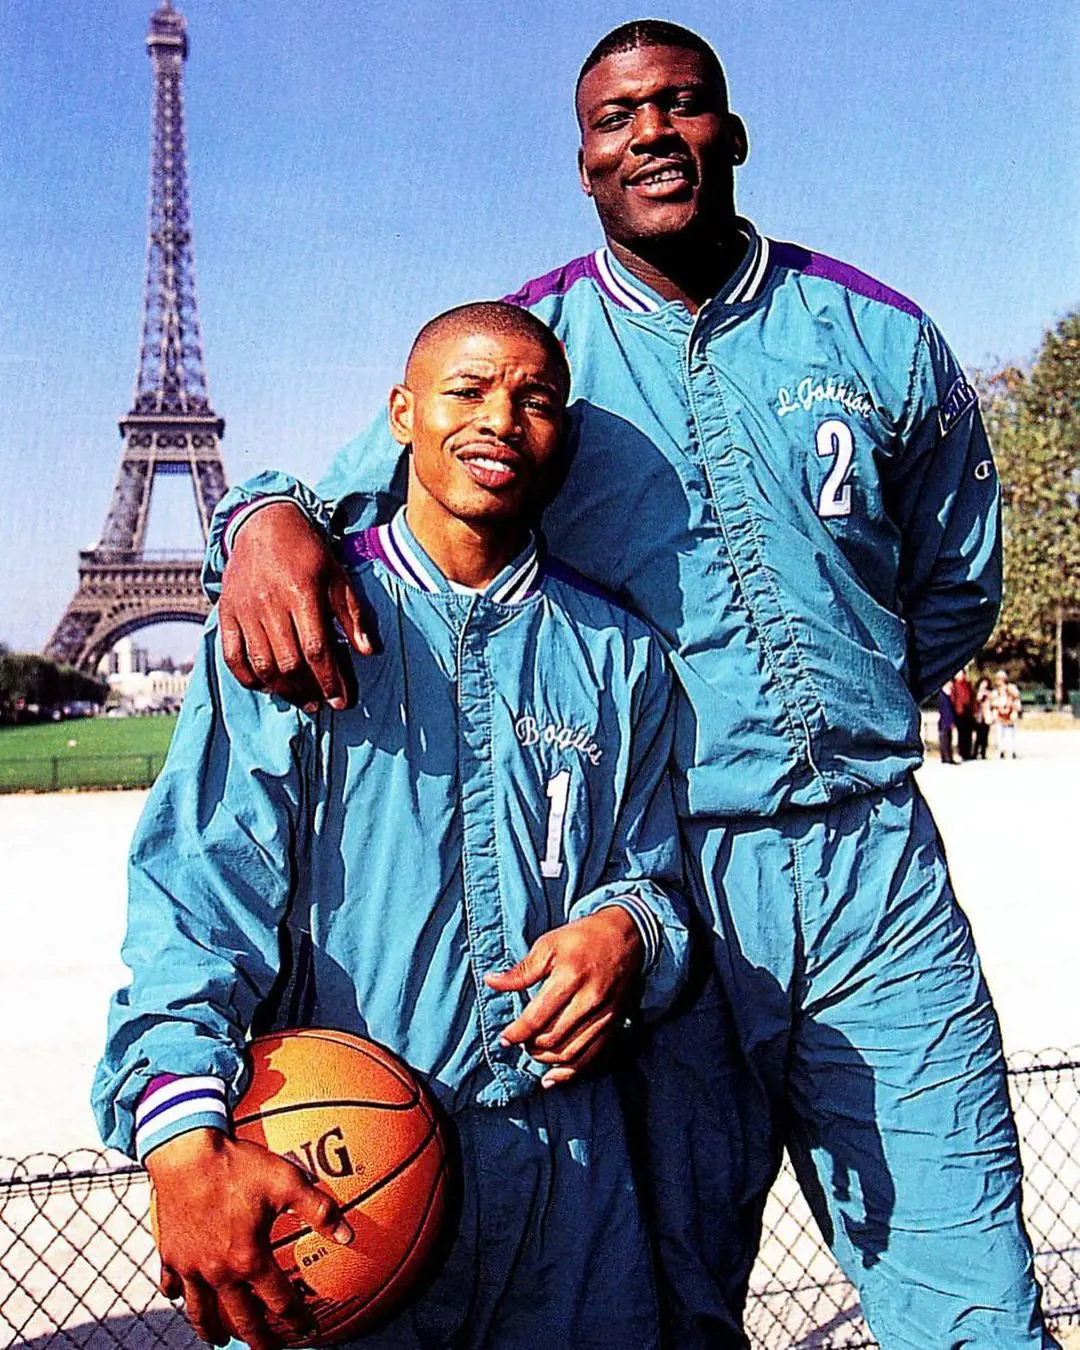 Larry and Muggsy Bogues striking a pose in front of Eiffel Tower in Paris